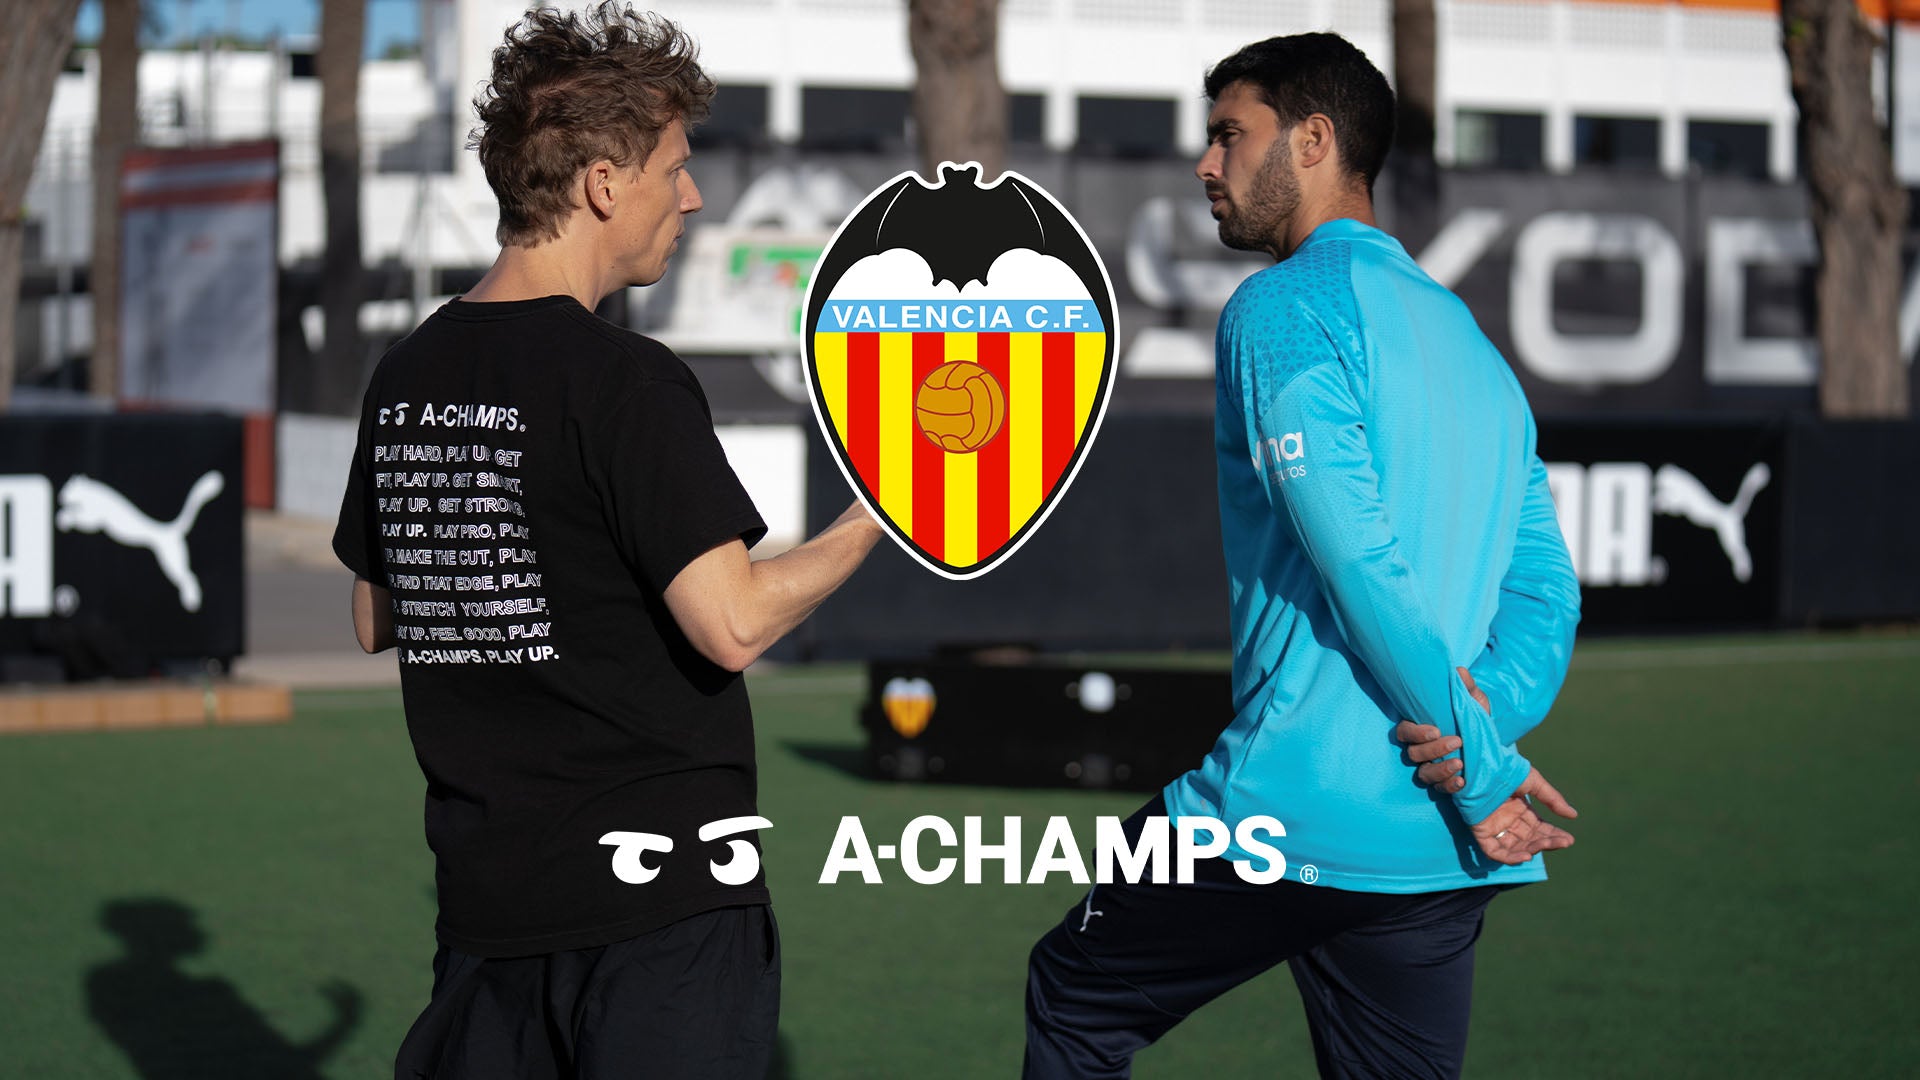 A-Champs Partners with Valencia CF